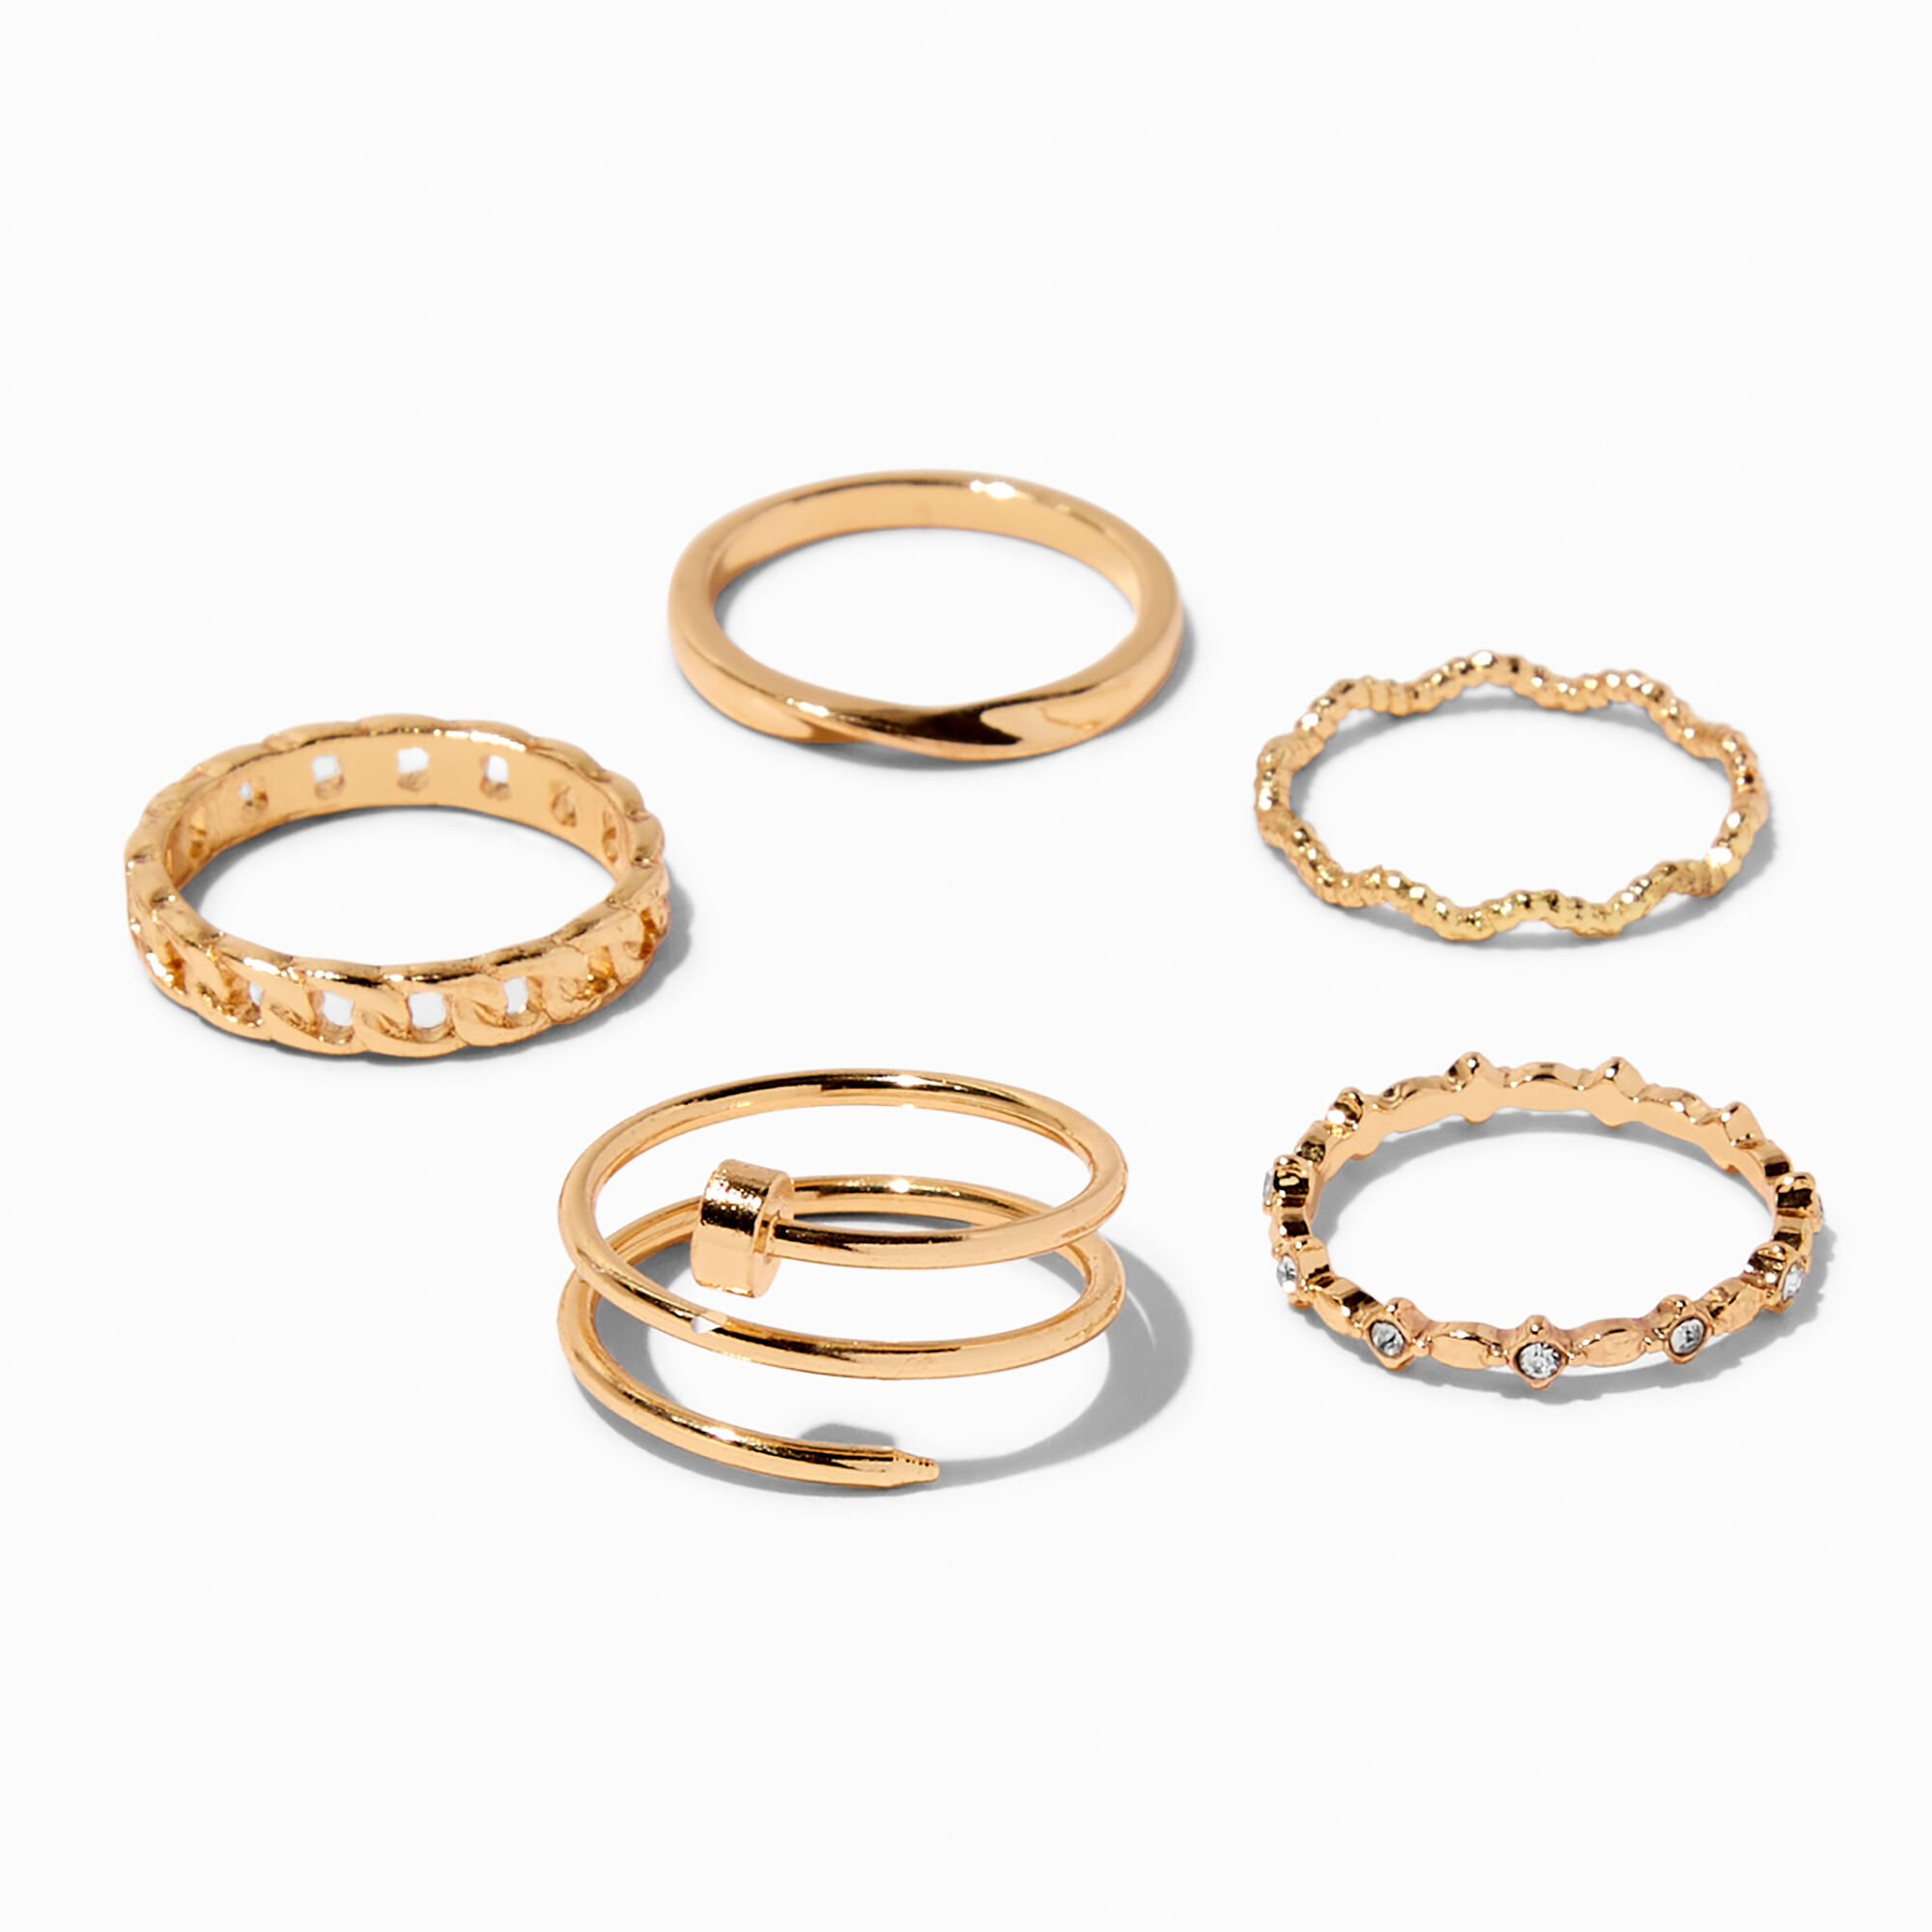 View Claires Tone Twisted Nail Rings 5 Pack Gold information